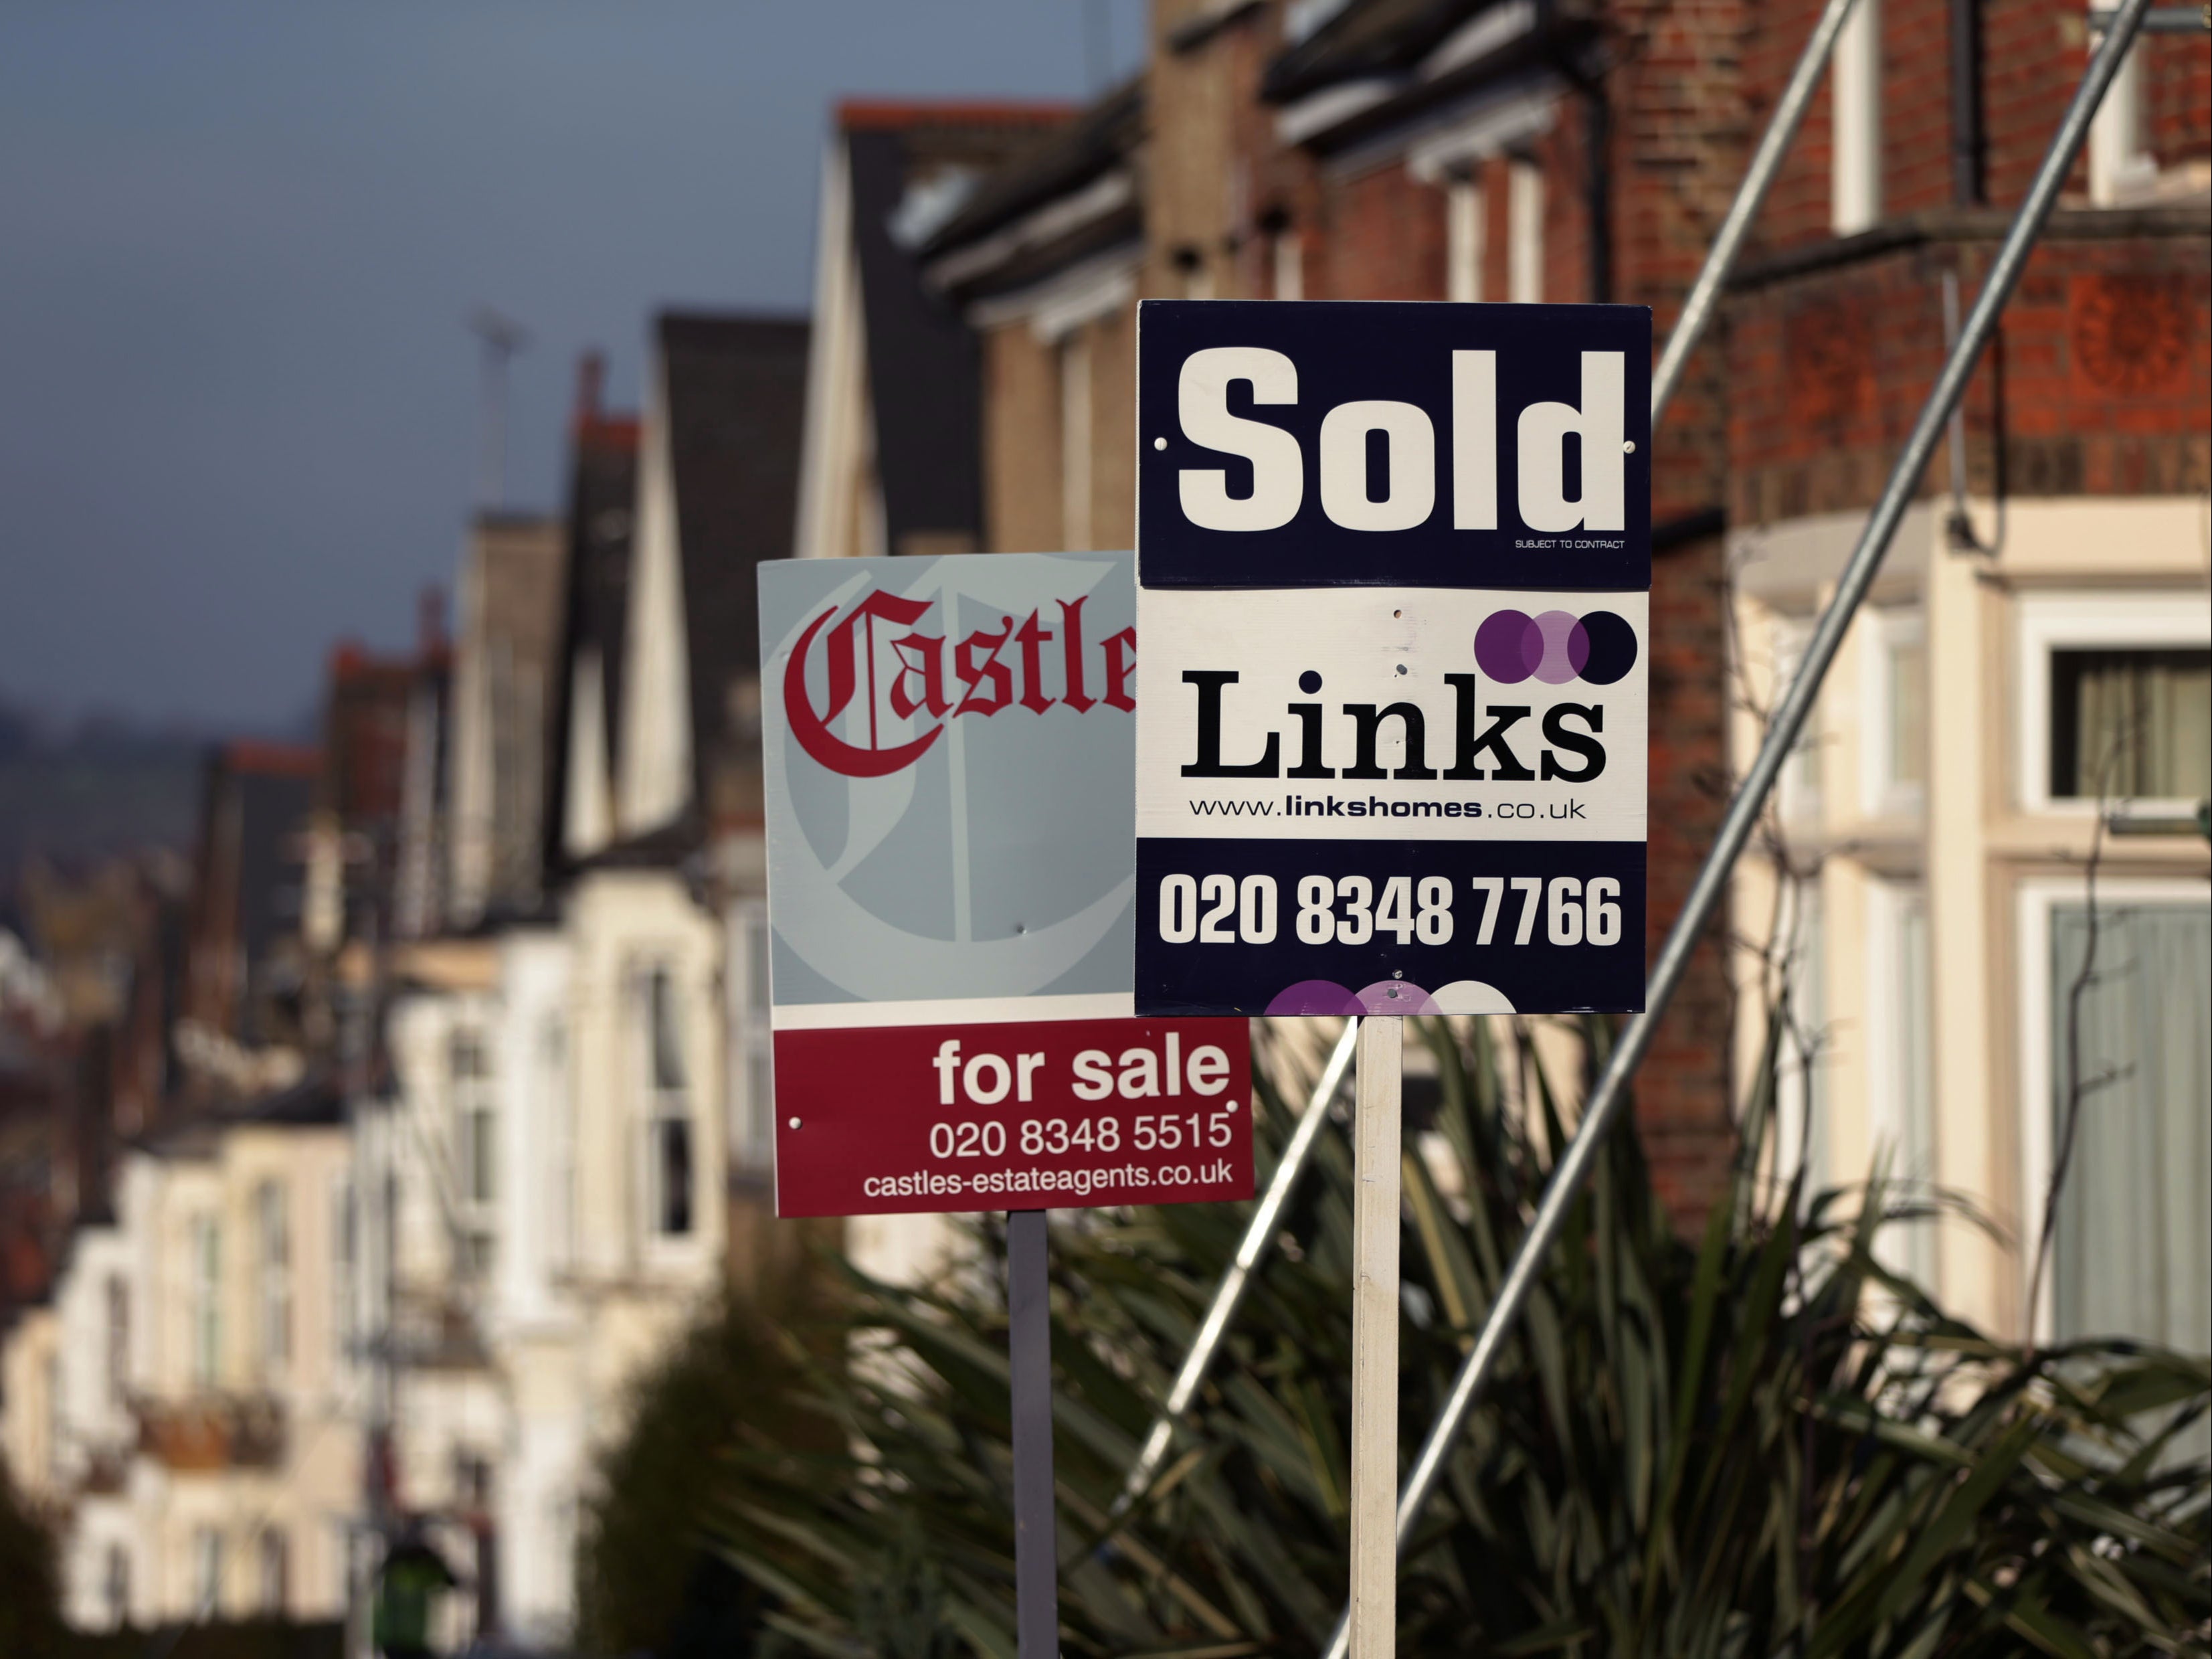 The number of UK residential sales rose by nearly a quarter in January 2021 compared to the same month a year earlier, according to HMRC